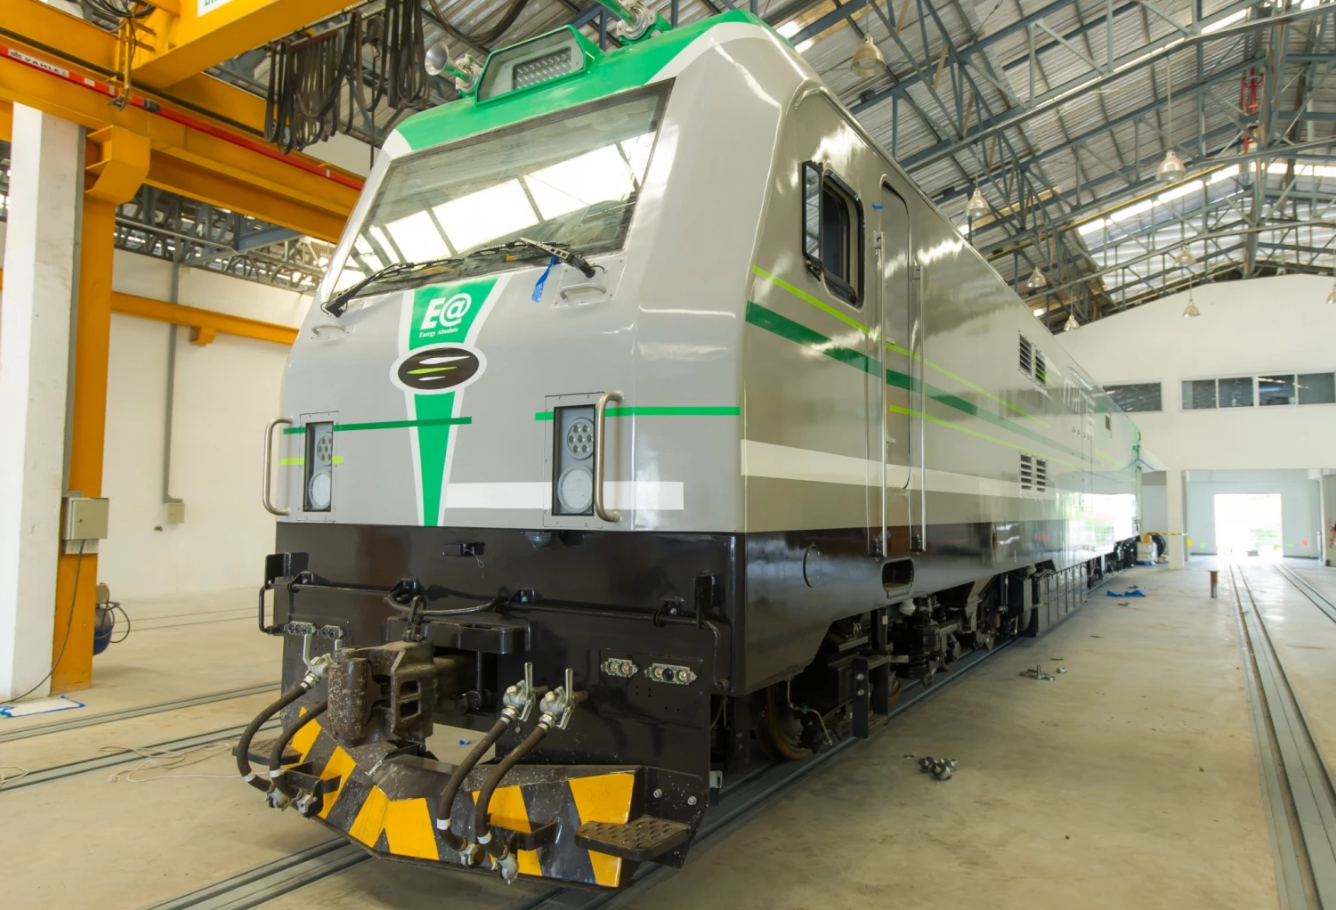 CRRC battery to be tested in Thailand